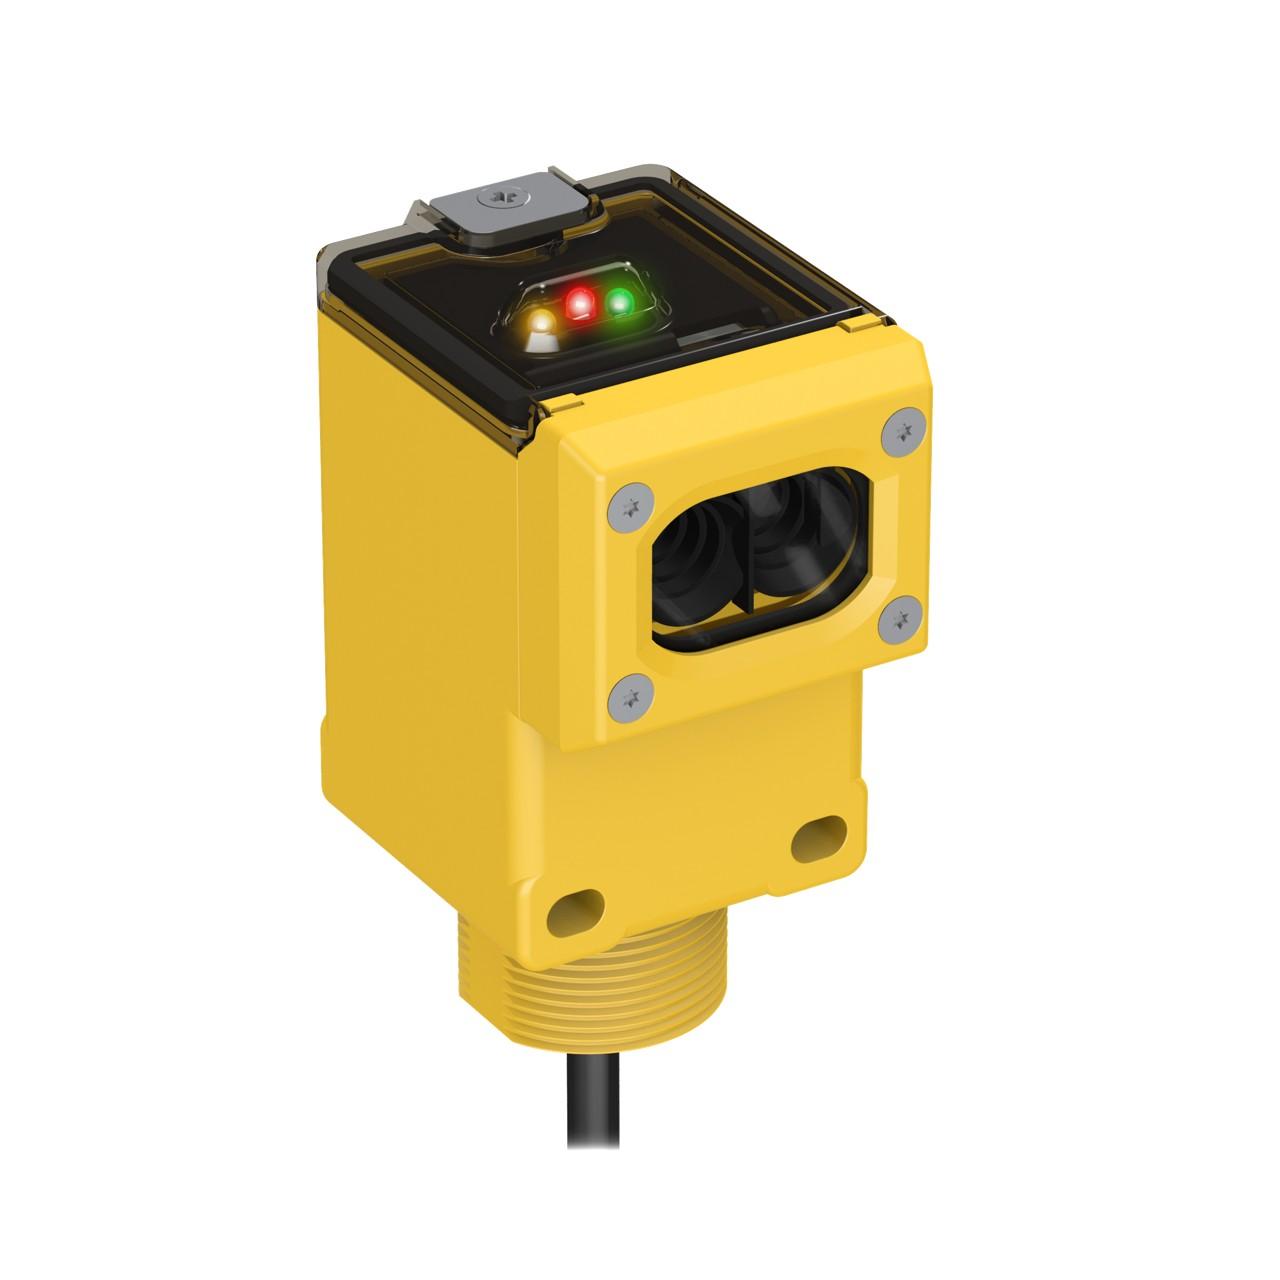 Banner Q45AD9D Intrinsically-safe photo-electric sensor with diffuse mode - Banner Engineering (Q series - Q45AD9) - Part #37617 - Sensing range 300mm - Infrared (IR) light (880nm) - 1 x digital output (NAMUR) (Light-ON or Dark-ON operation) - Supply voltage 5Vdc-15Vdc 